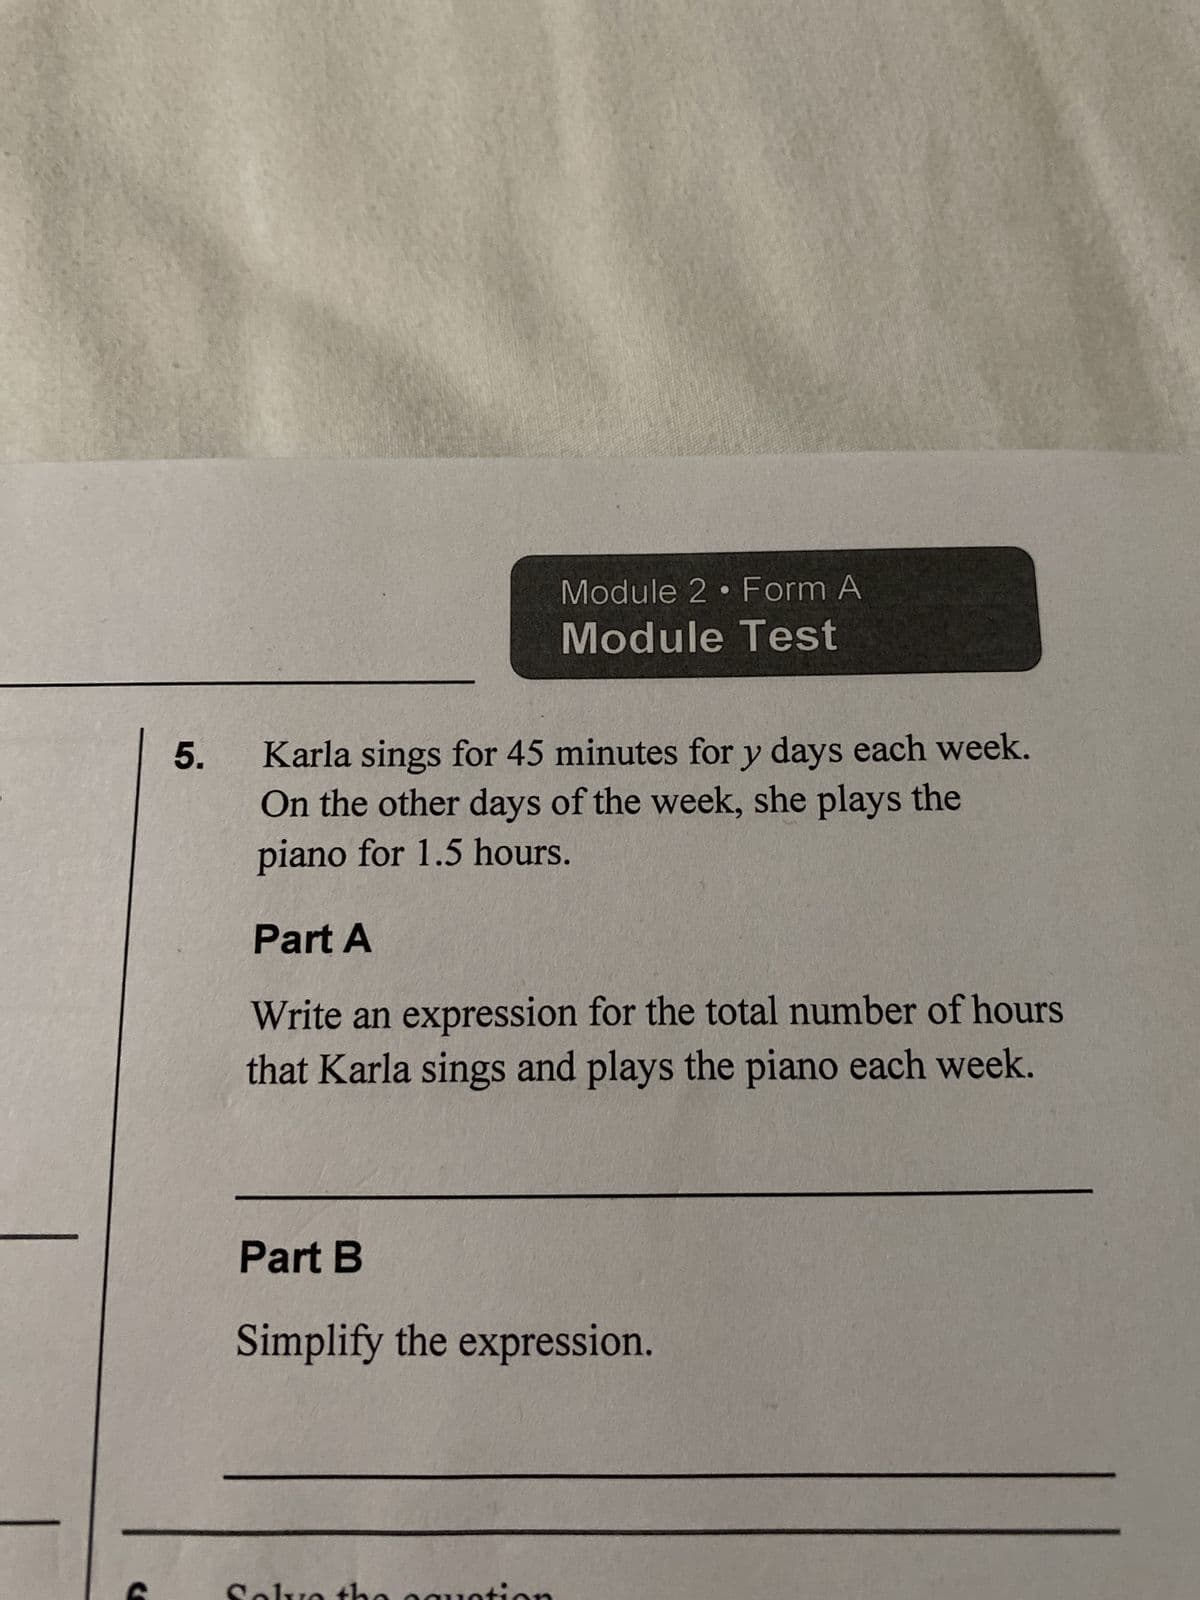 5.
Module 2 Form A
Module Test
Karla sings for 45 minutes for y days each week.
On the other days of the week, she plays the
piano for 1.5 hours.
Part A
Write an expression for the total number of hours
that Karla sings and plays the piano each week.
Part B
Simplify the expression.